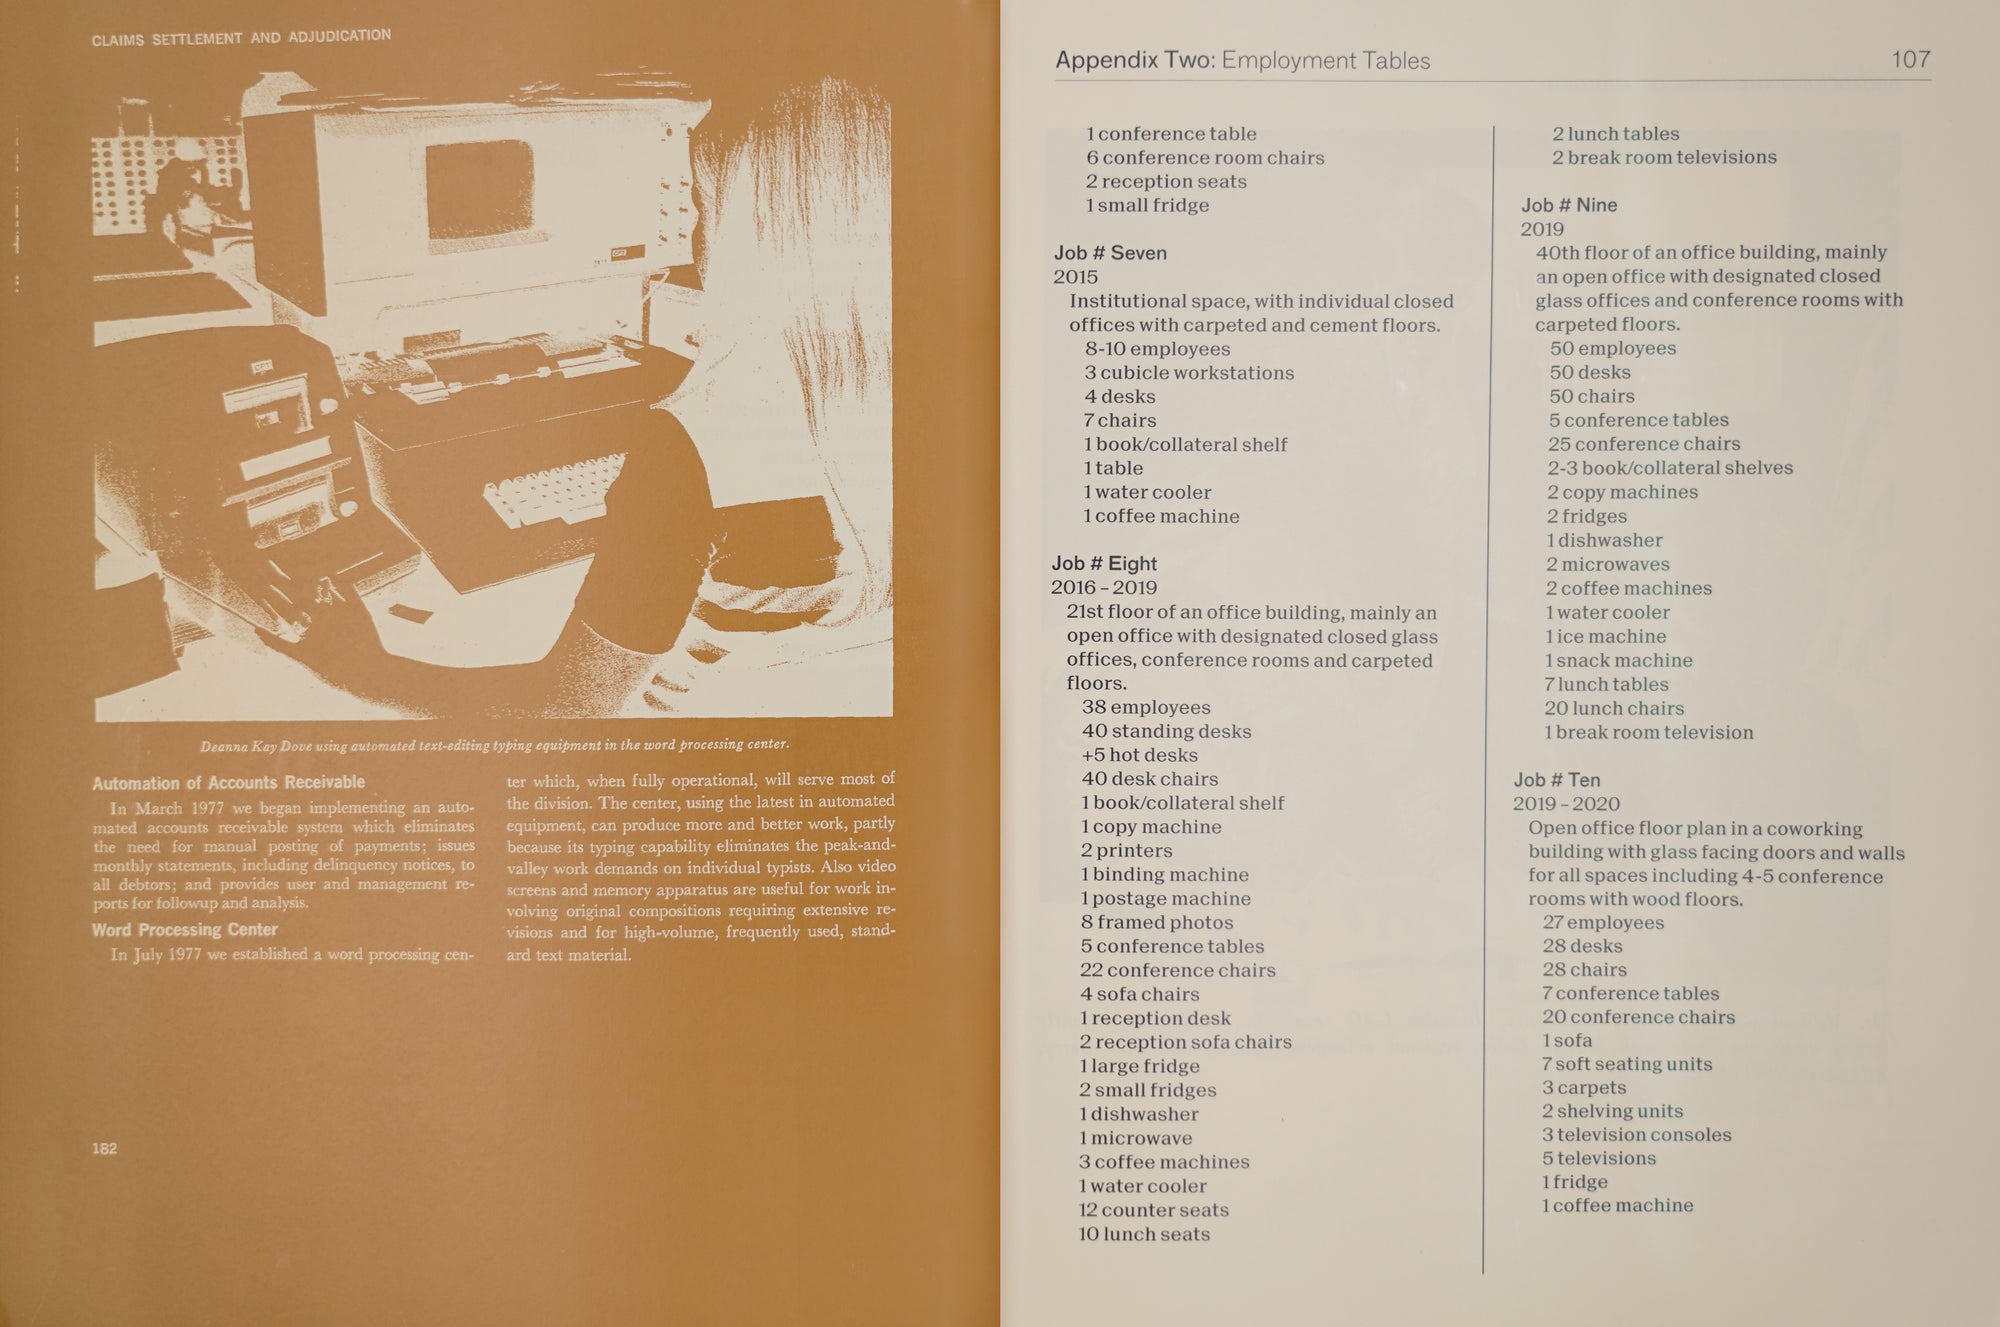 A spread held in muted earth tones, to the left in a tan cognac colour, to the right in eggshell. On the left page there's an image of a woman sitting by a computer, on the right an excerpt of employmenr tables that seem to line out several office inventories.